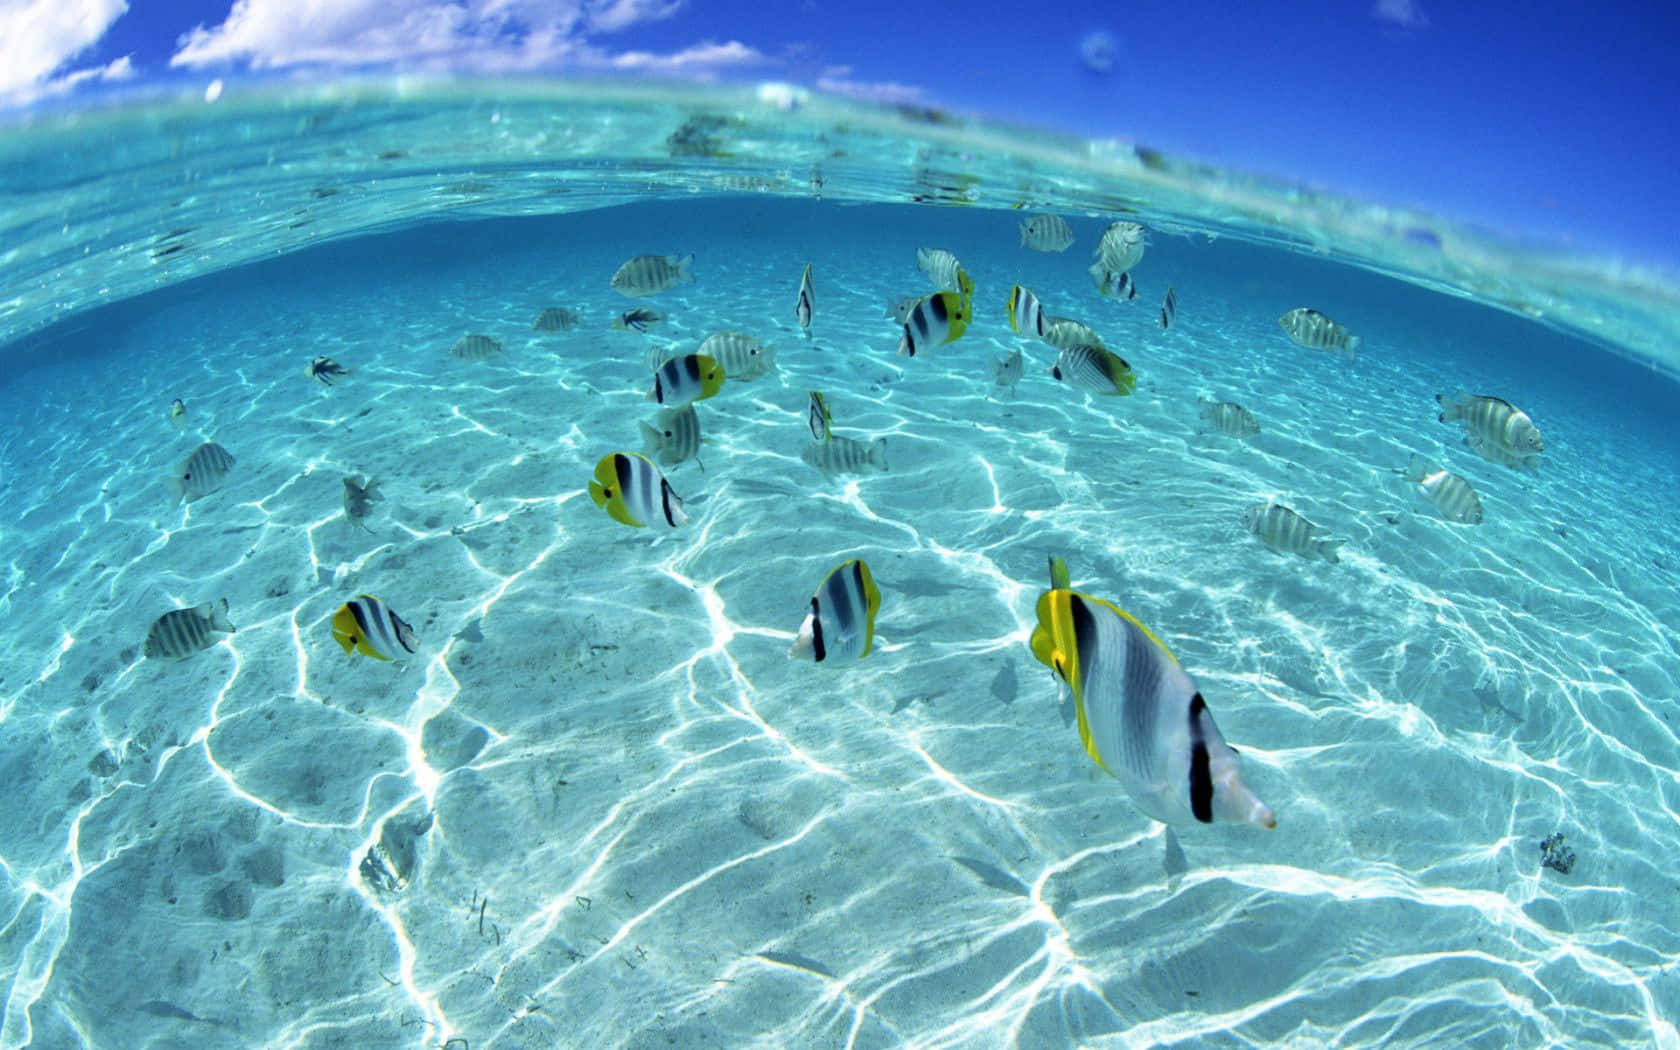 A school of colorful tropical fish swimming near the ocean floor. Wallpaper